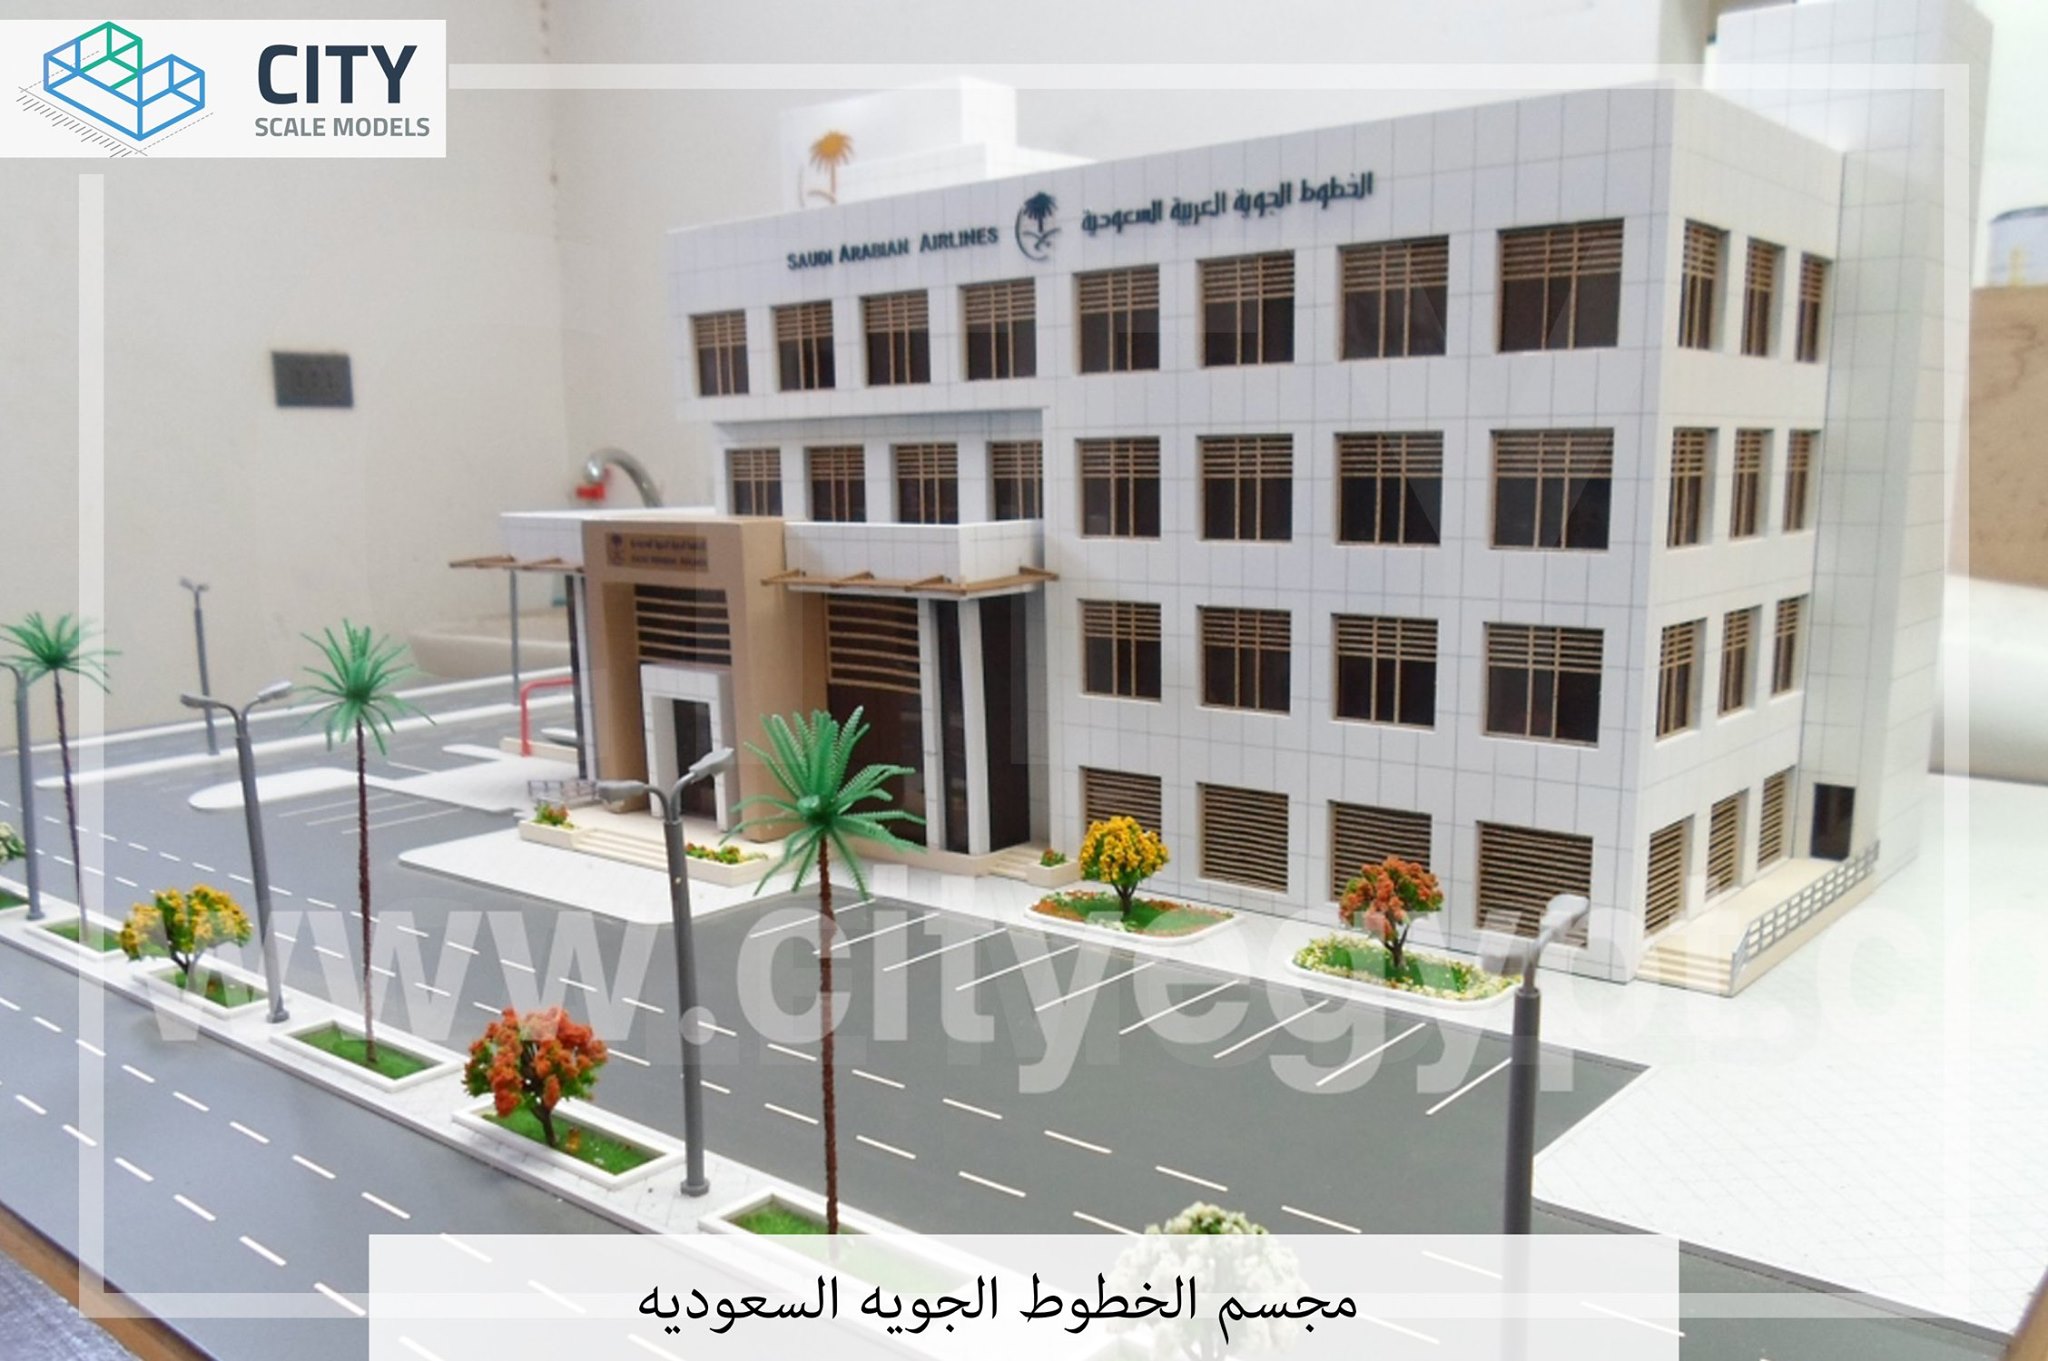 A model of the Saudi Airlines building3